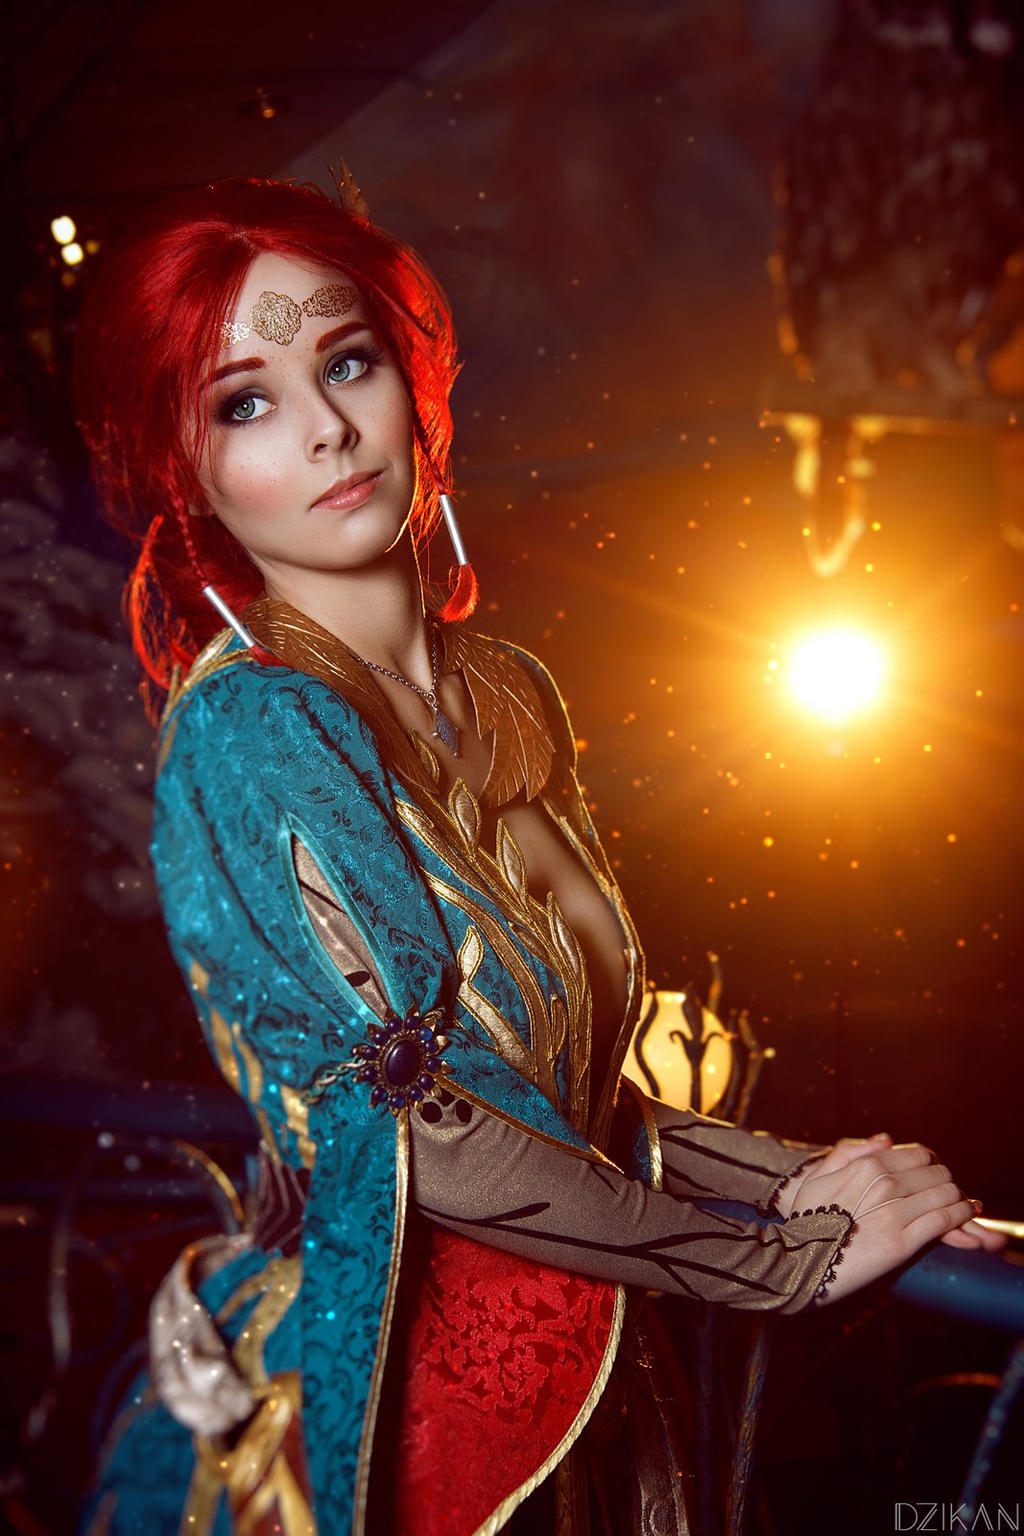 The Witcher 3 - Triss Merigold cosplay